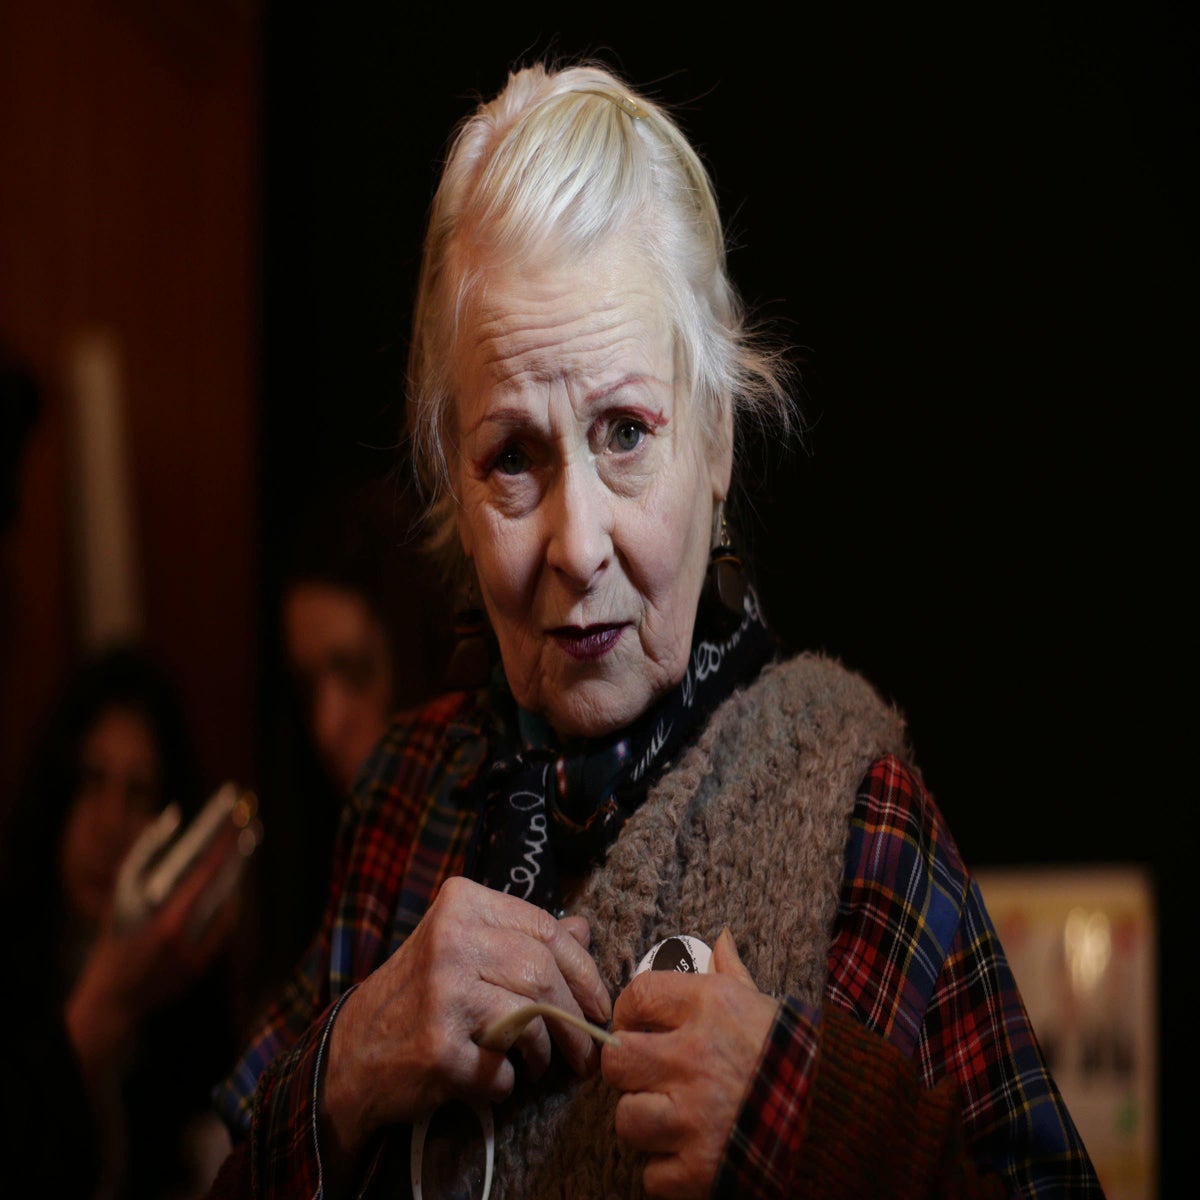 Vivienne Westwood, Britain's provocative dame of fashion, dead at